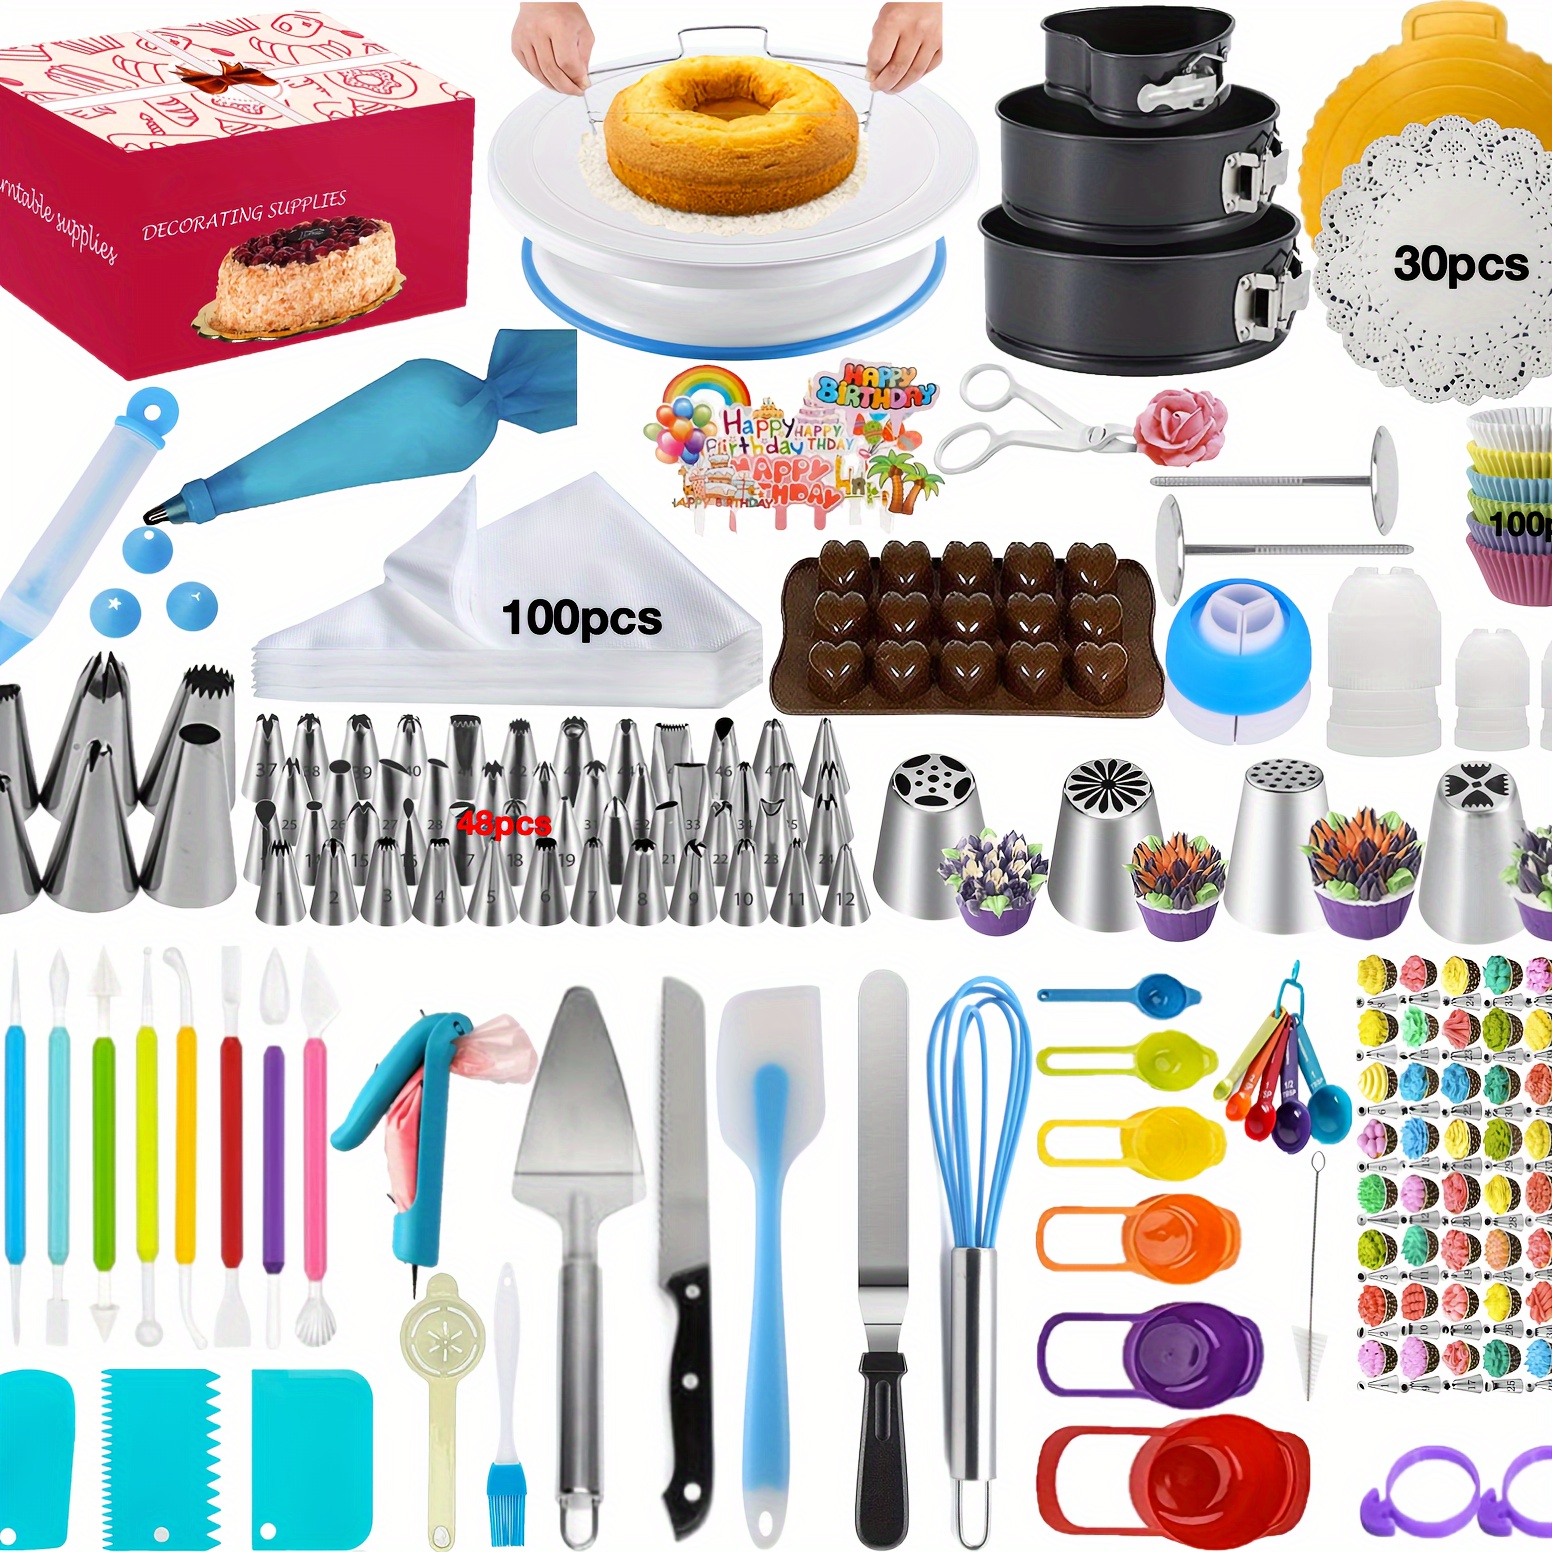 

Cake Decorating Supplies, Cake Decorating Kit 3 Packs Springform Cake Pans, Cake Rotating Turntable, 54 Piping Icing Tips, 4 Russian Nozzles, Chocolate Mold Baking, Mother's Day Gift Ideas